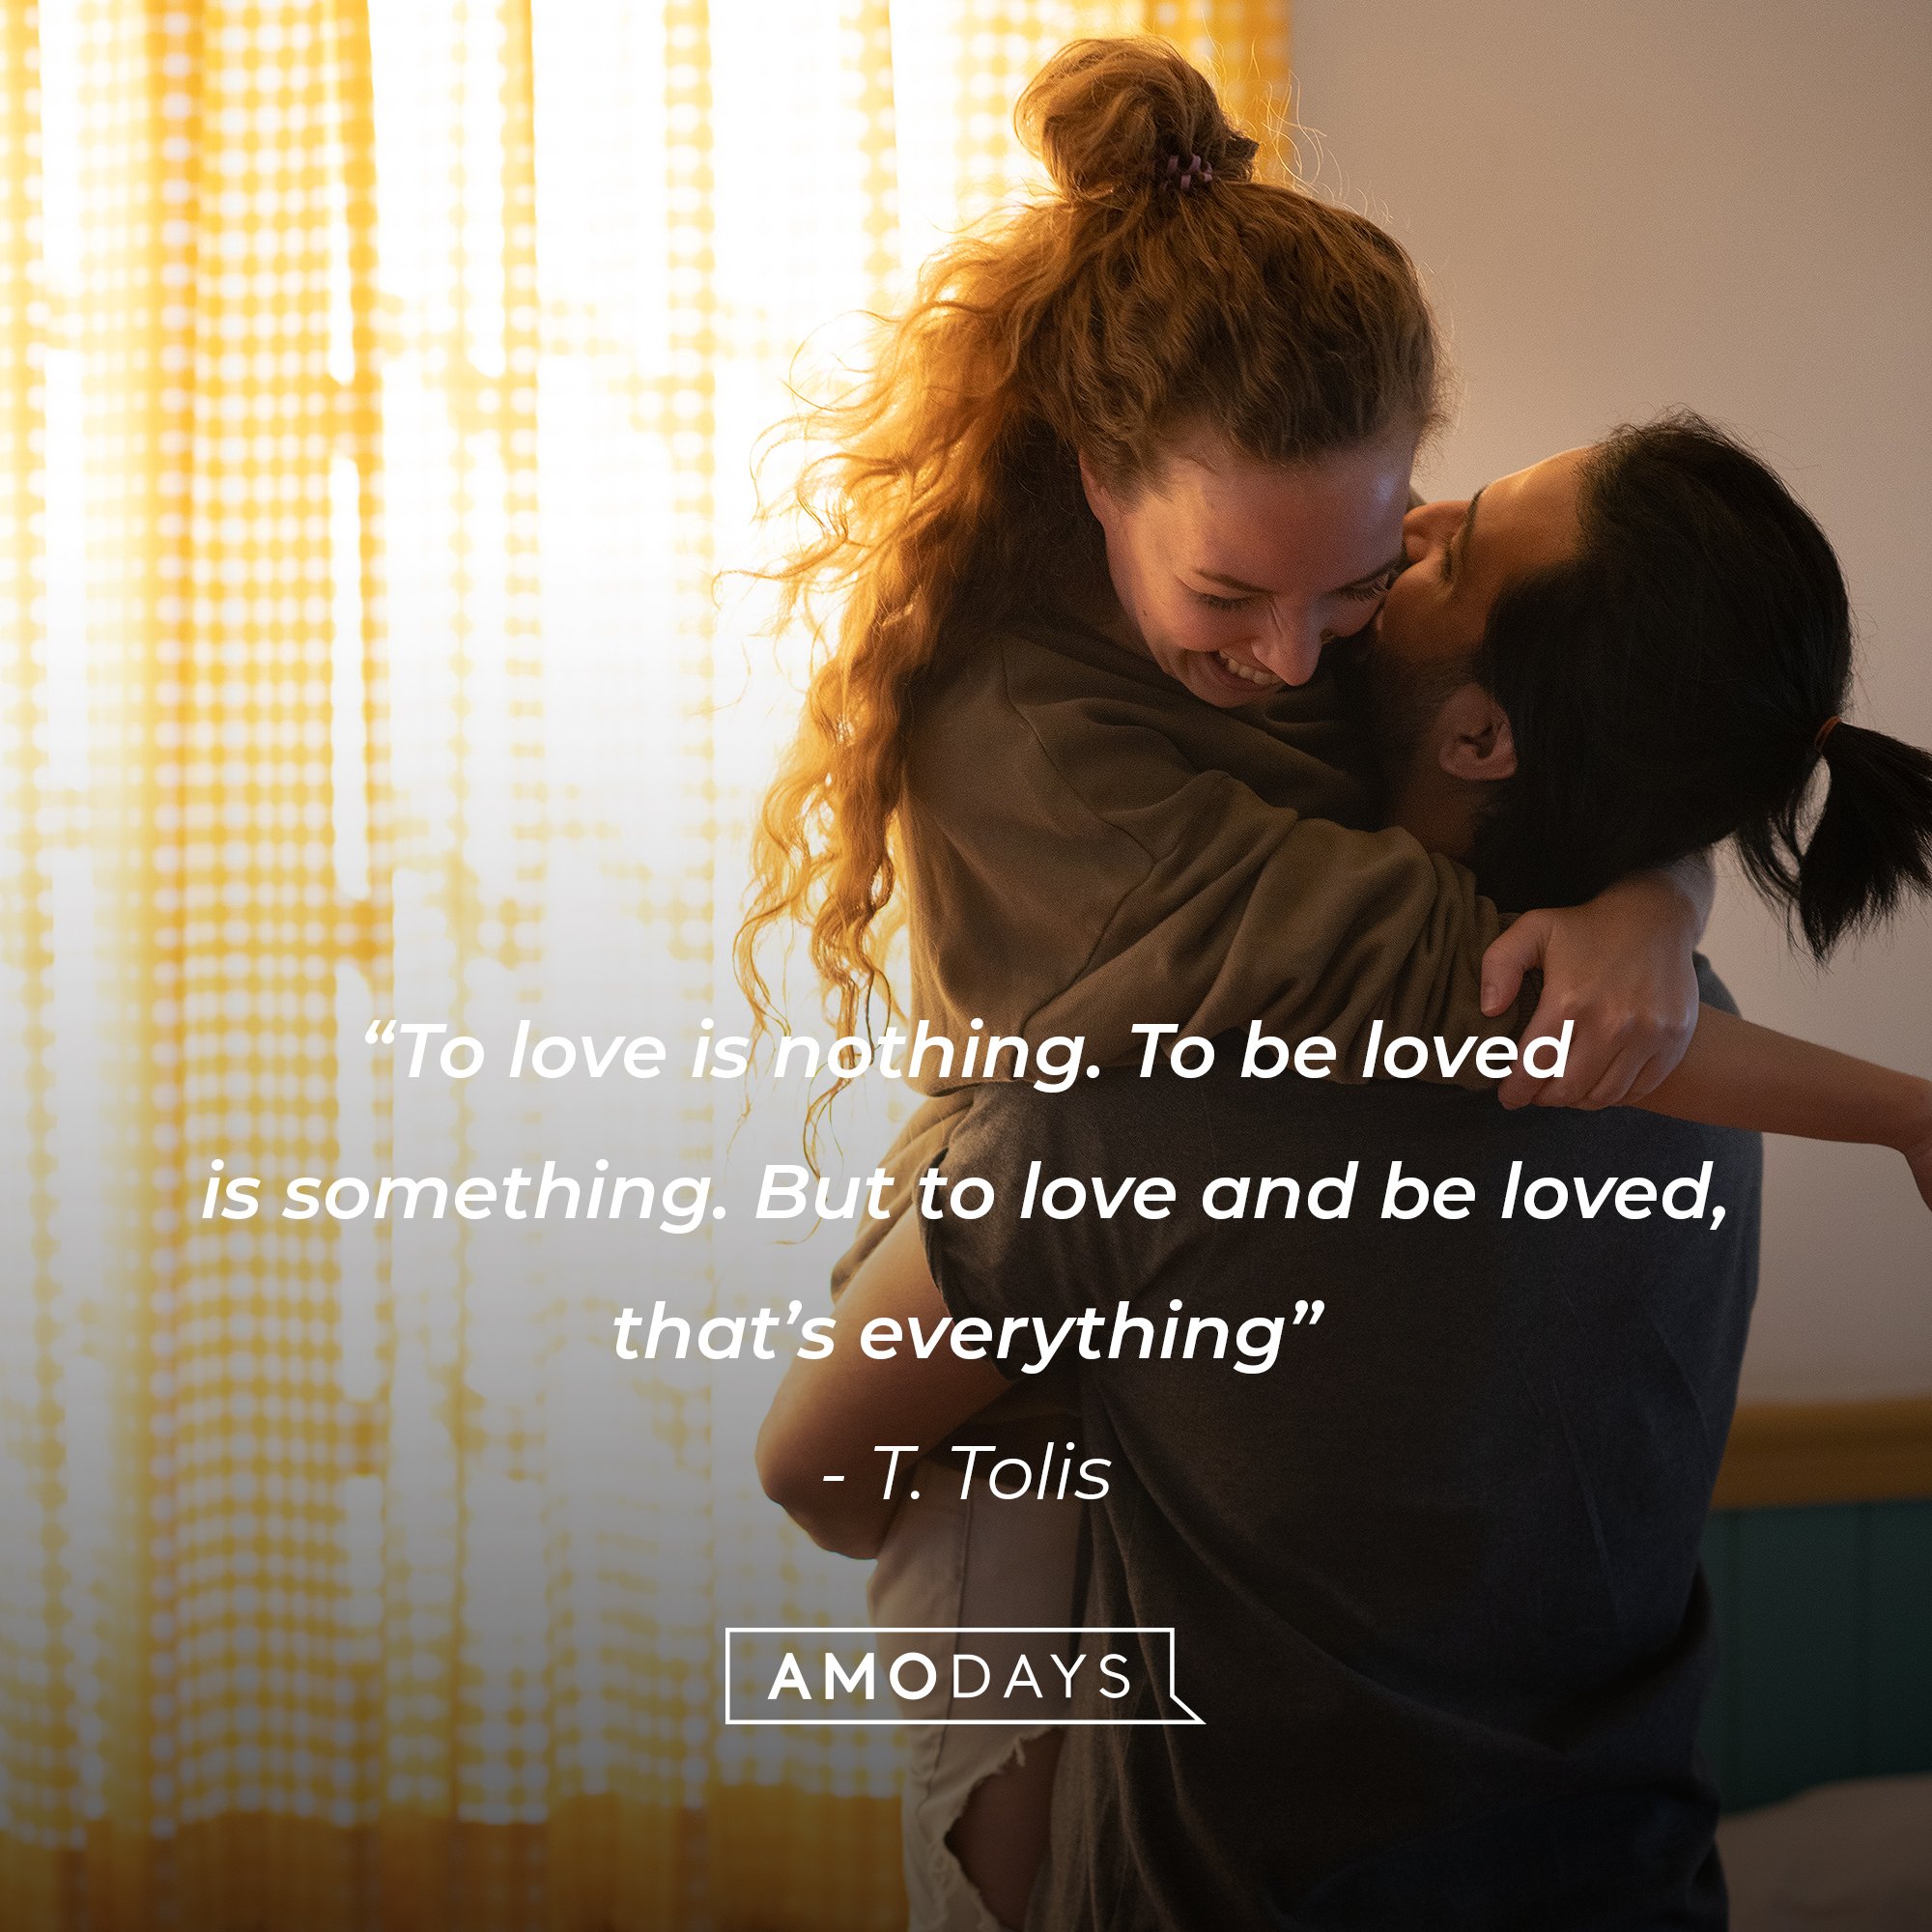 T. Tolis' quote: “To love is nothing. To be loved is something. But to love and be loved, that’s everything” | Image: AmoDays